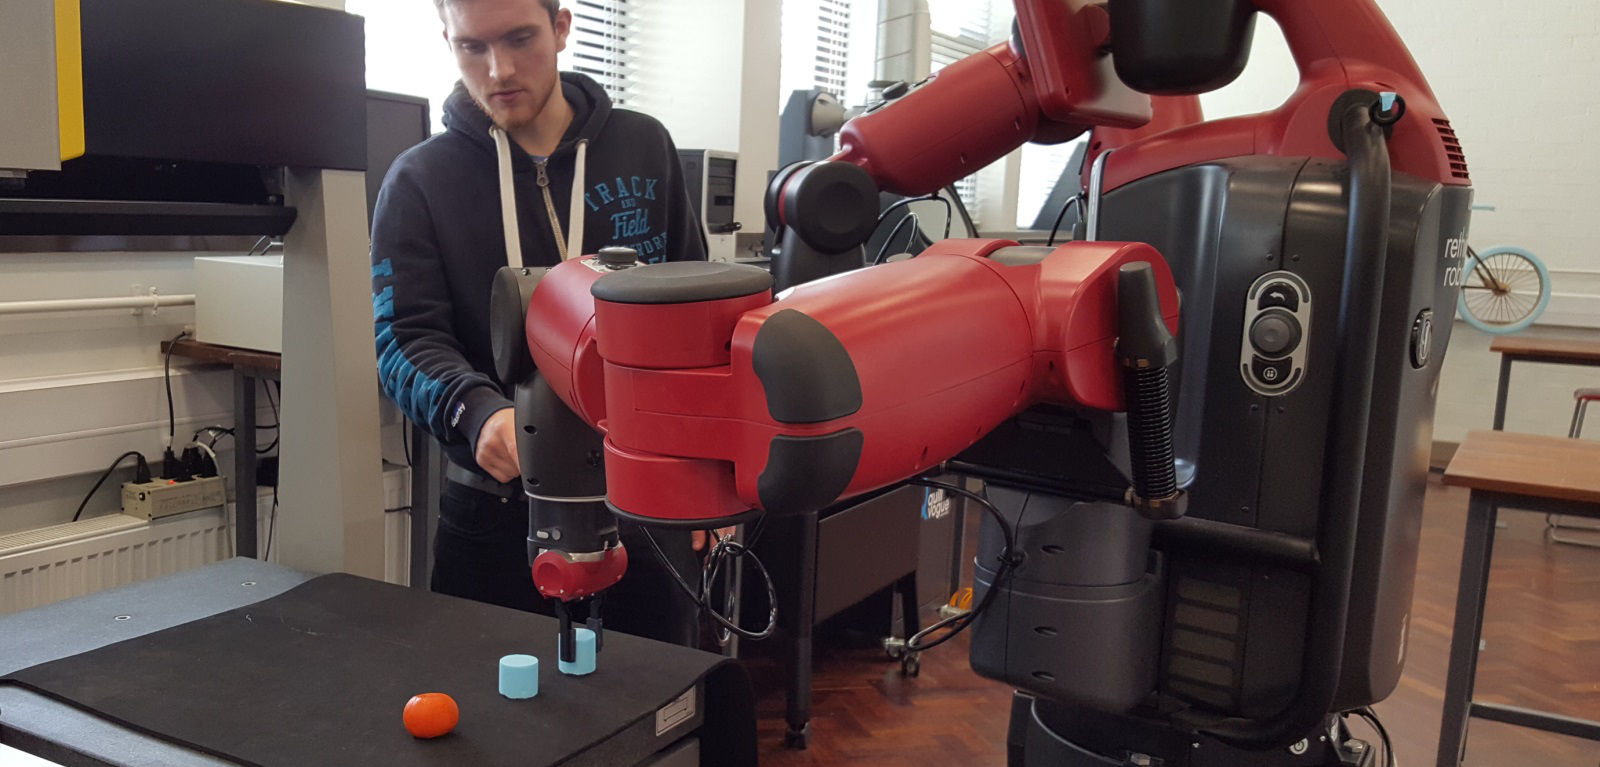 Student with Baxter robot